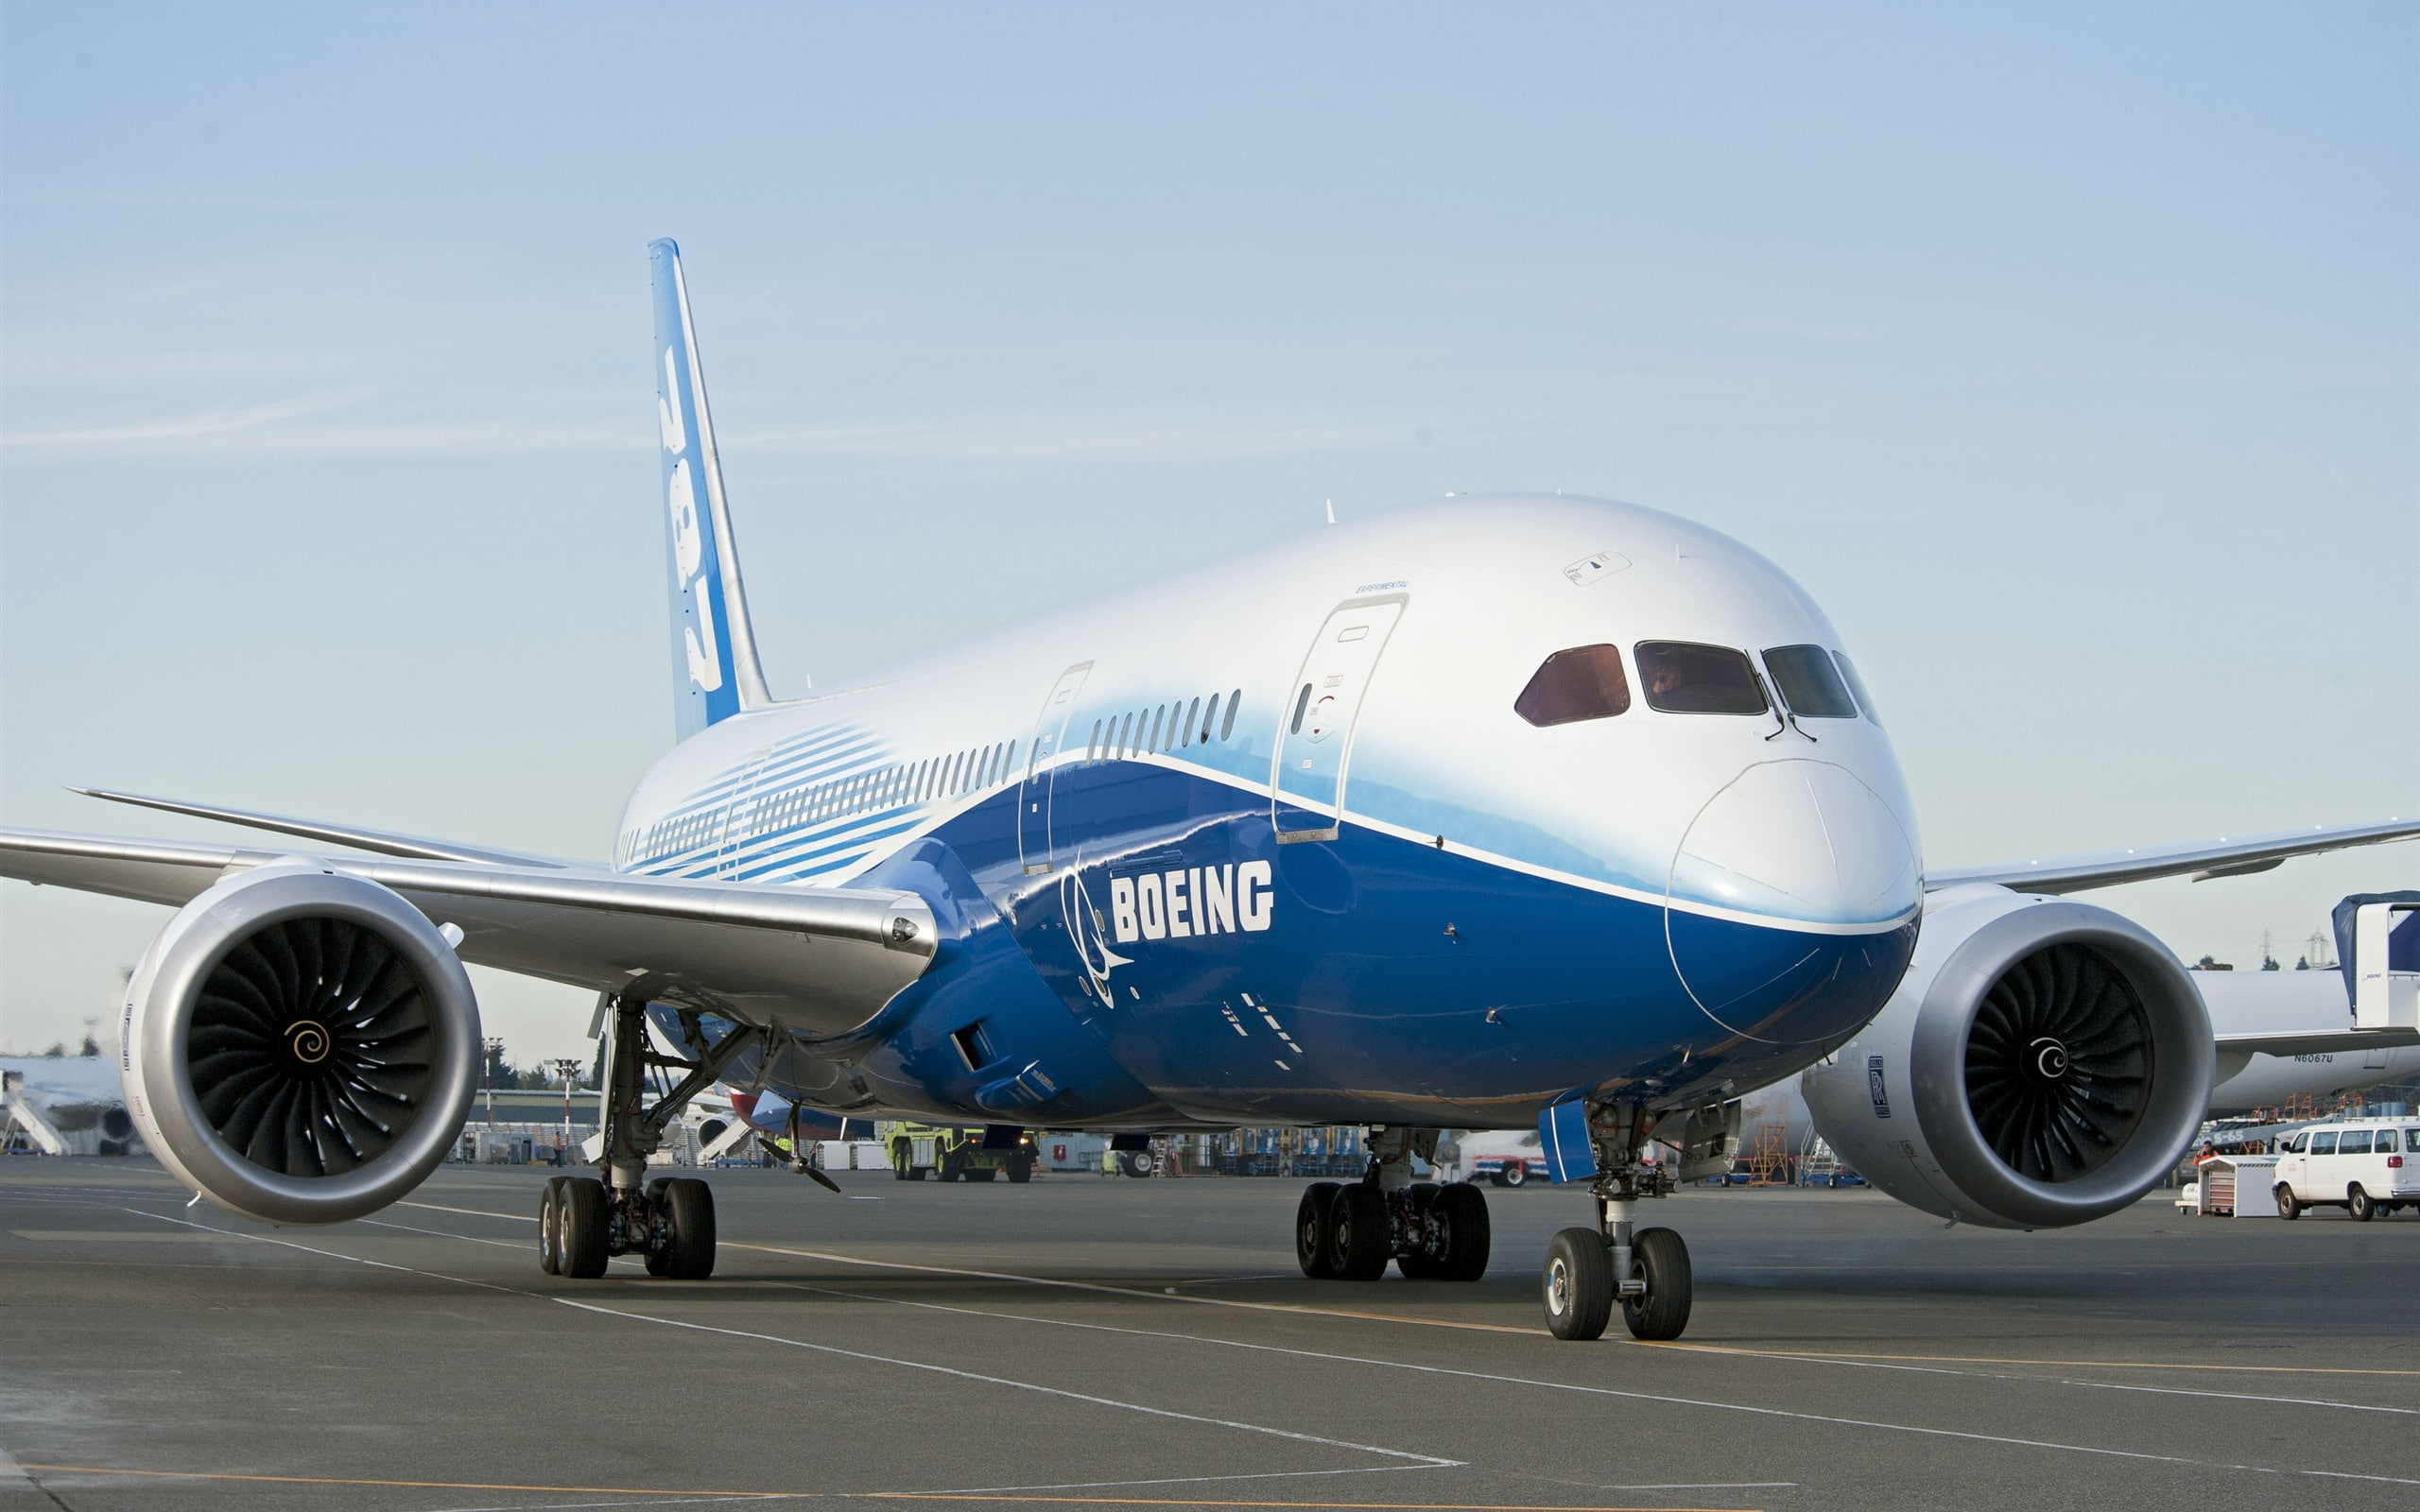 Boeing 787 Dreamliner HD Wallpaper 10, white and blue Boeing airplane